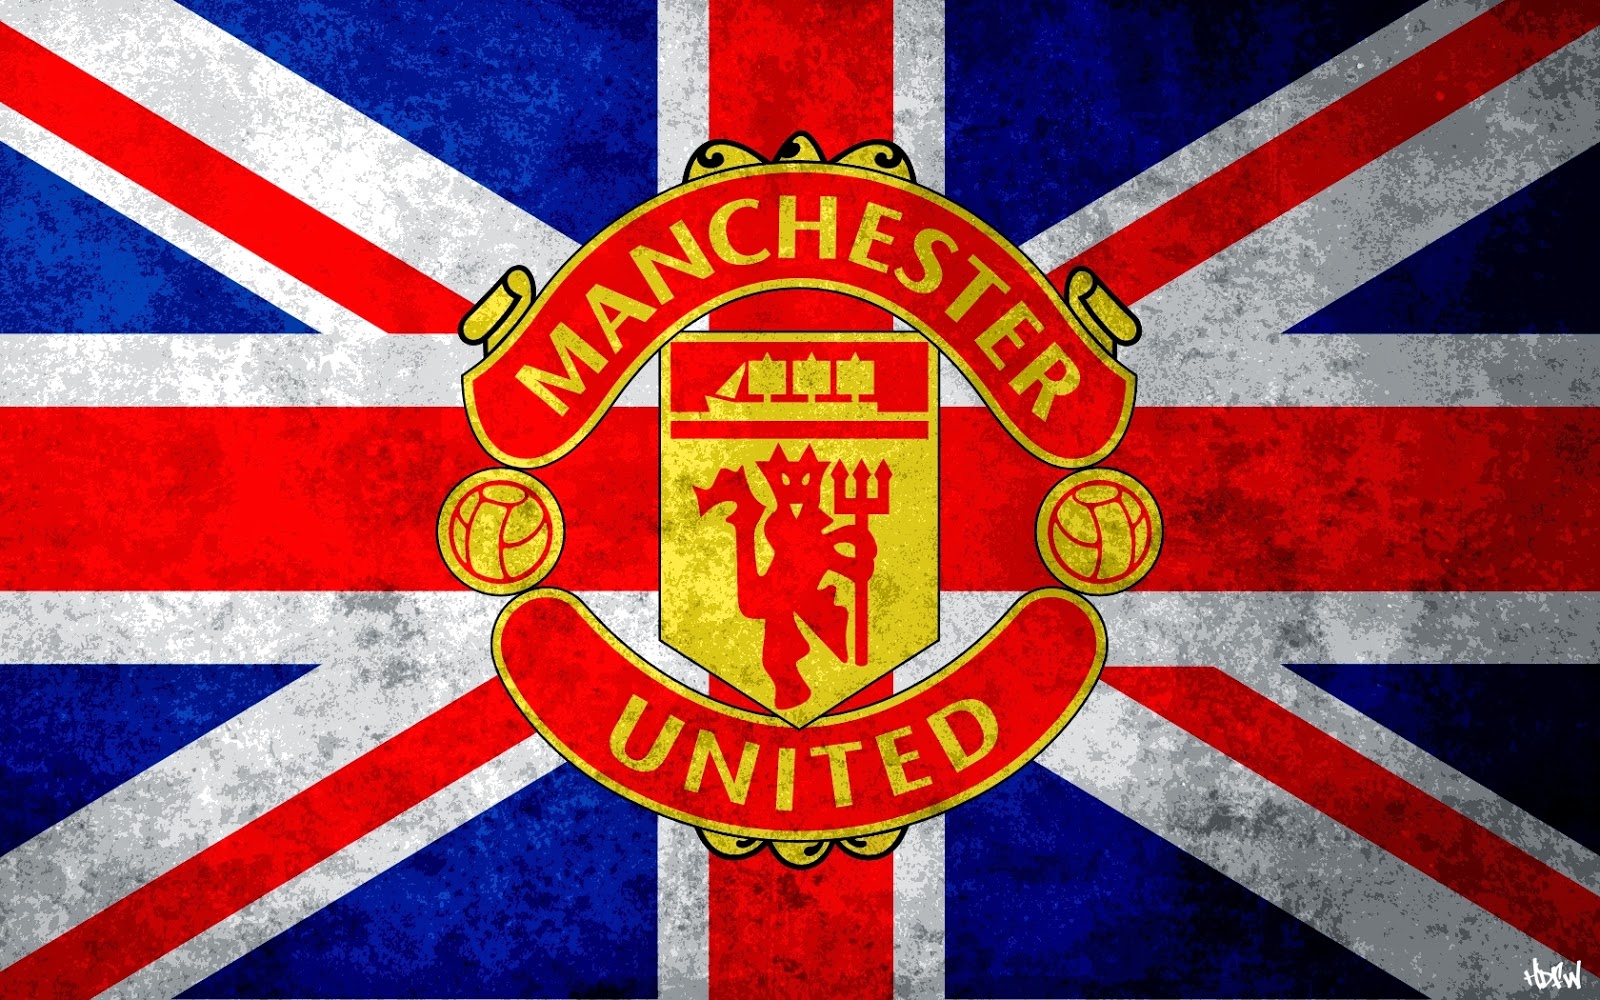 risfandy-sang-the-red-army-manchester-united-never-die